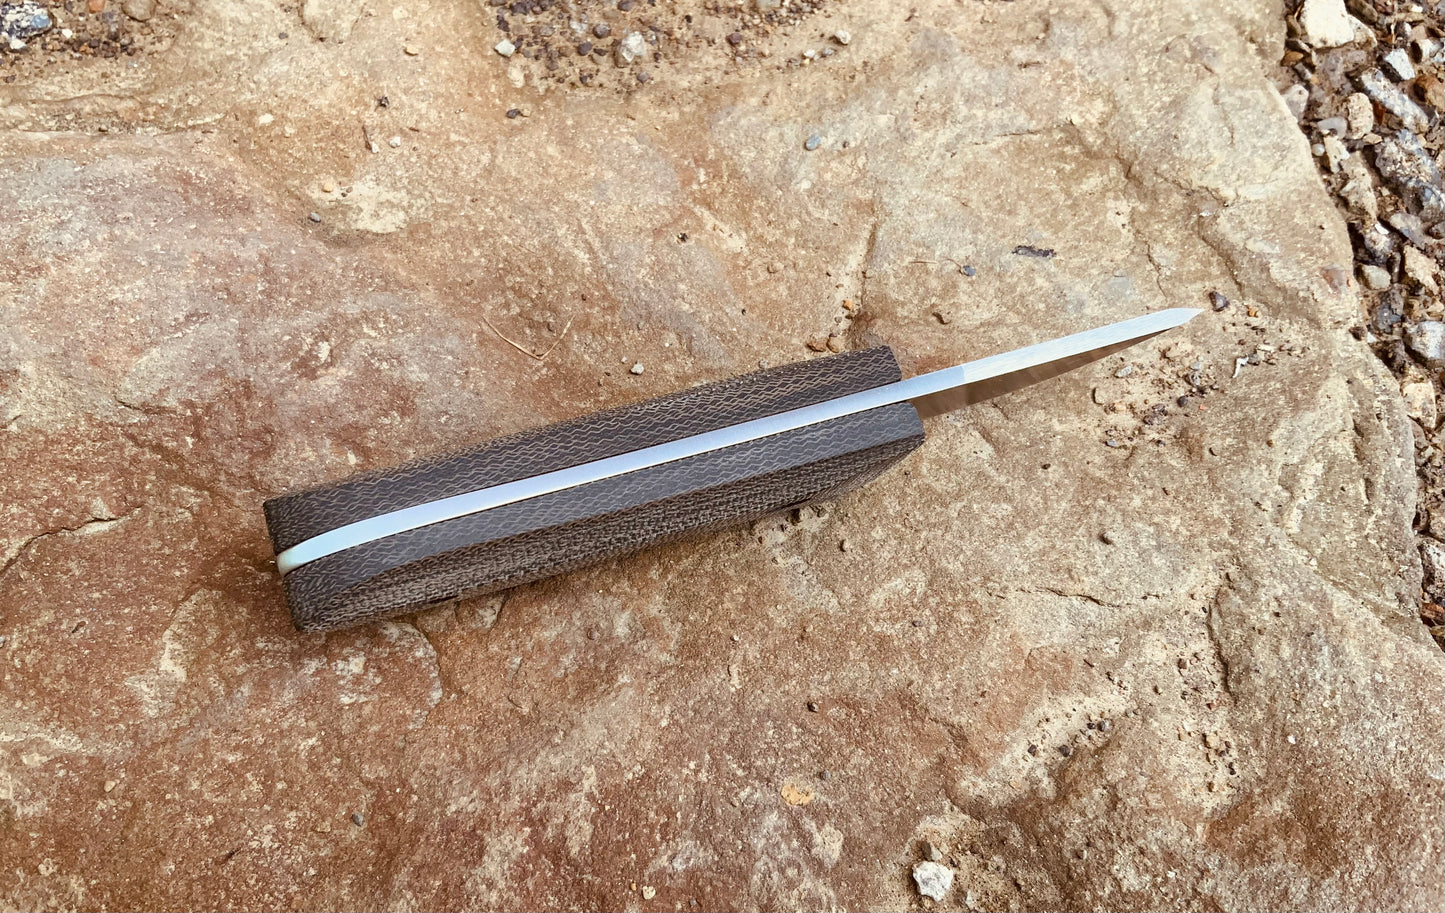 Kerf Carver Knife with Micarta Scales showing Knife Spine